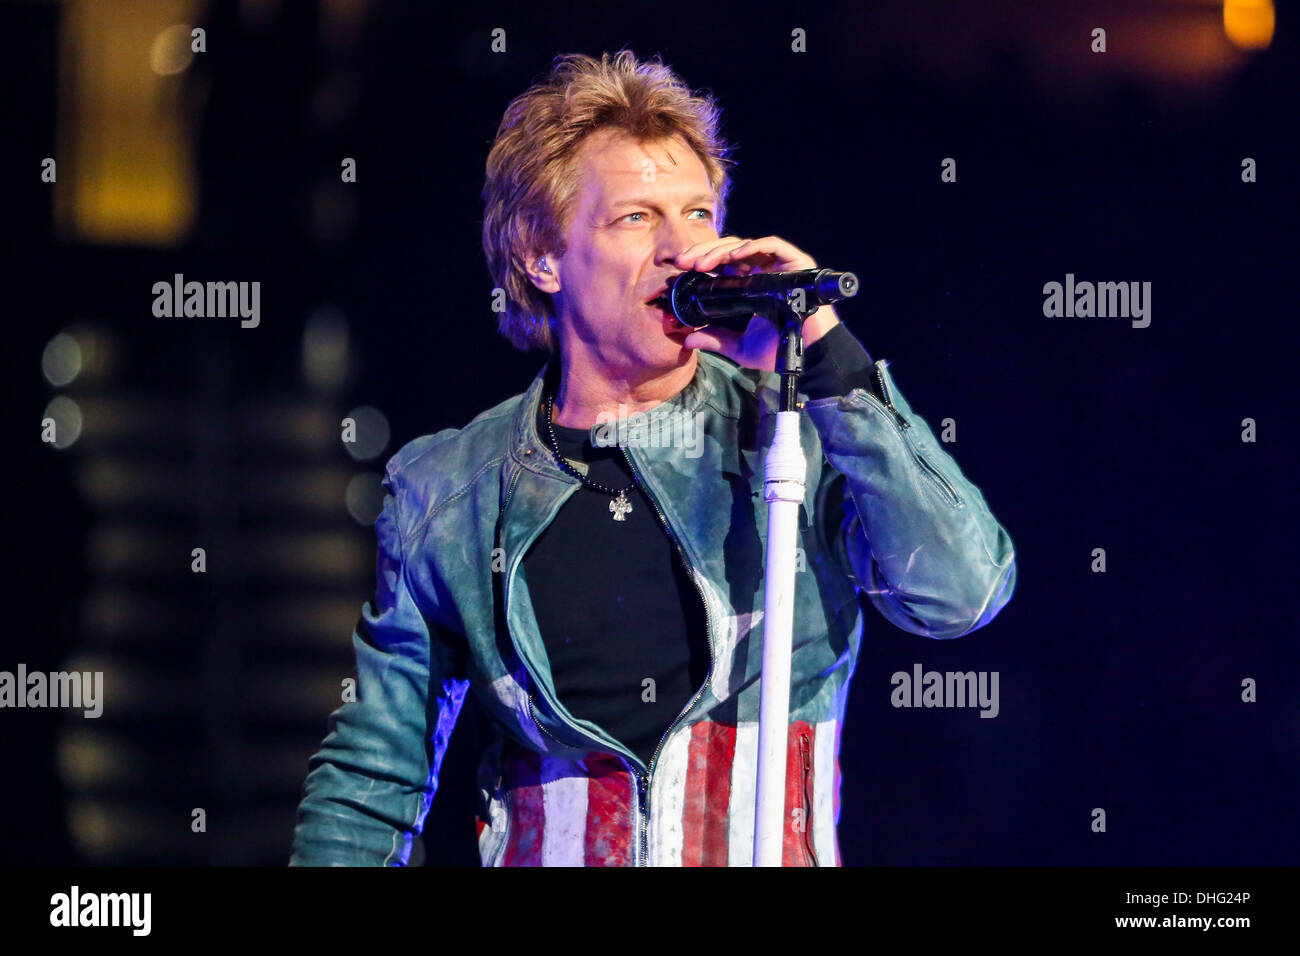 Bon Jovi performs in concert as part of their 2013-2014 Because We Can World Tour. Stock Photo